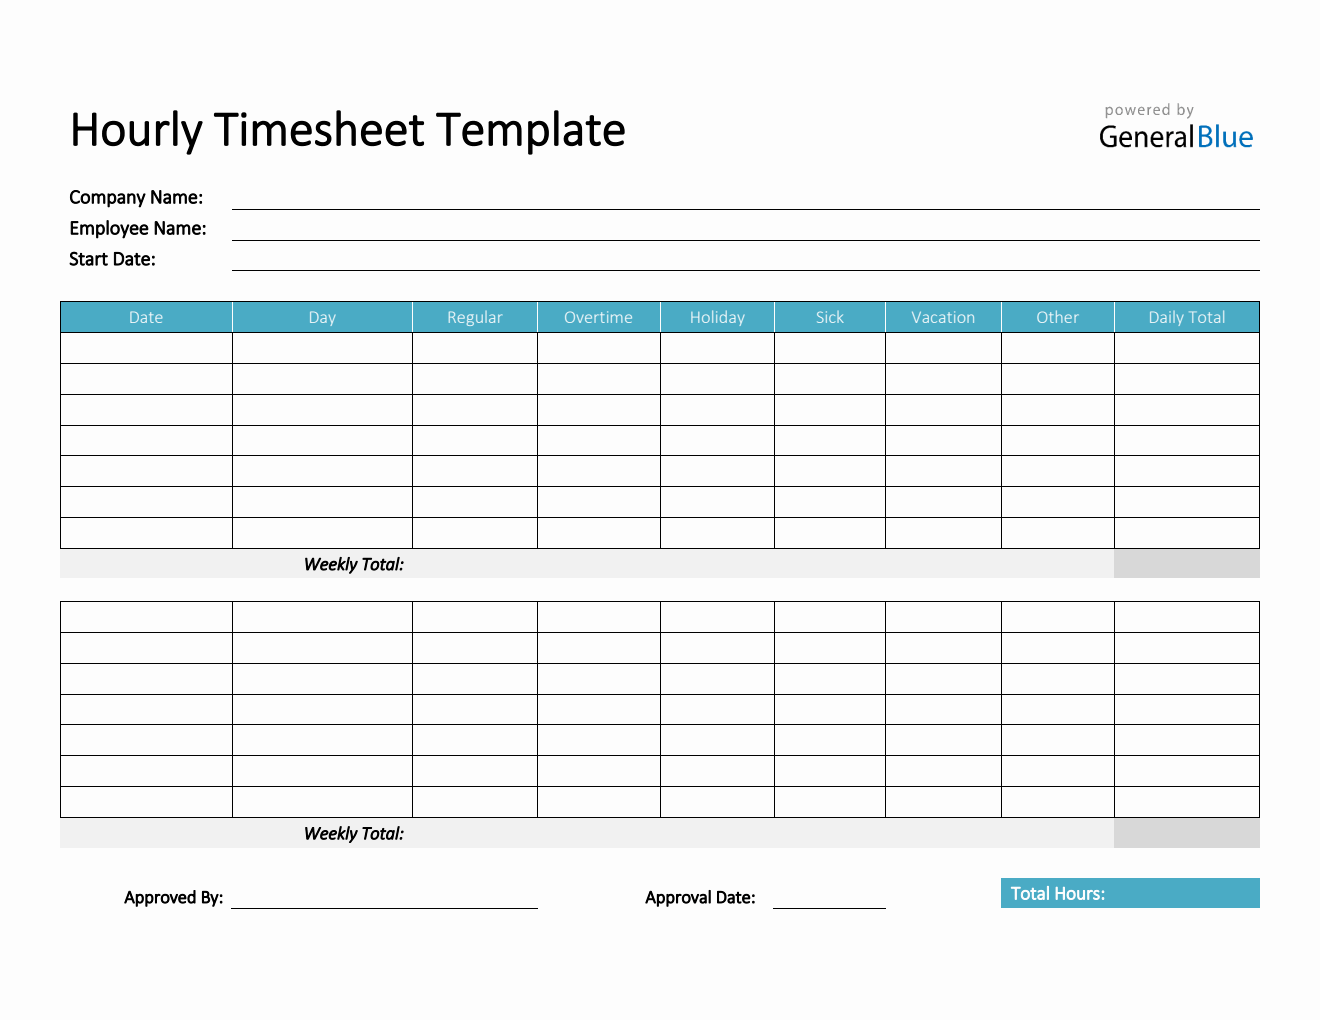 Hourly Timesheet Template in PDF (Basic)